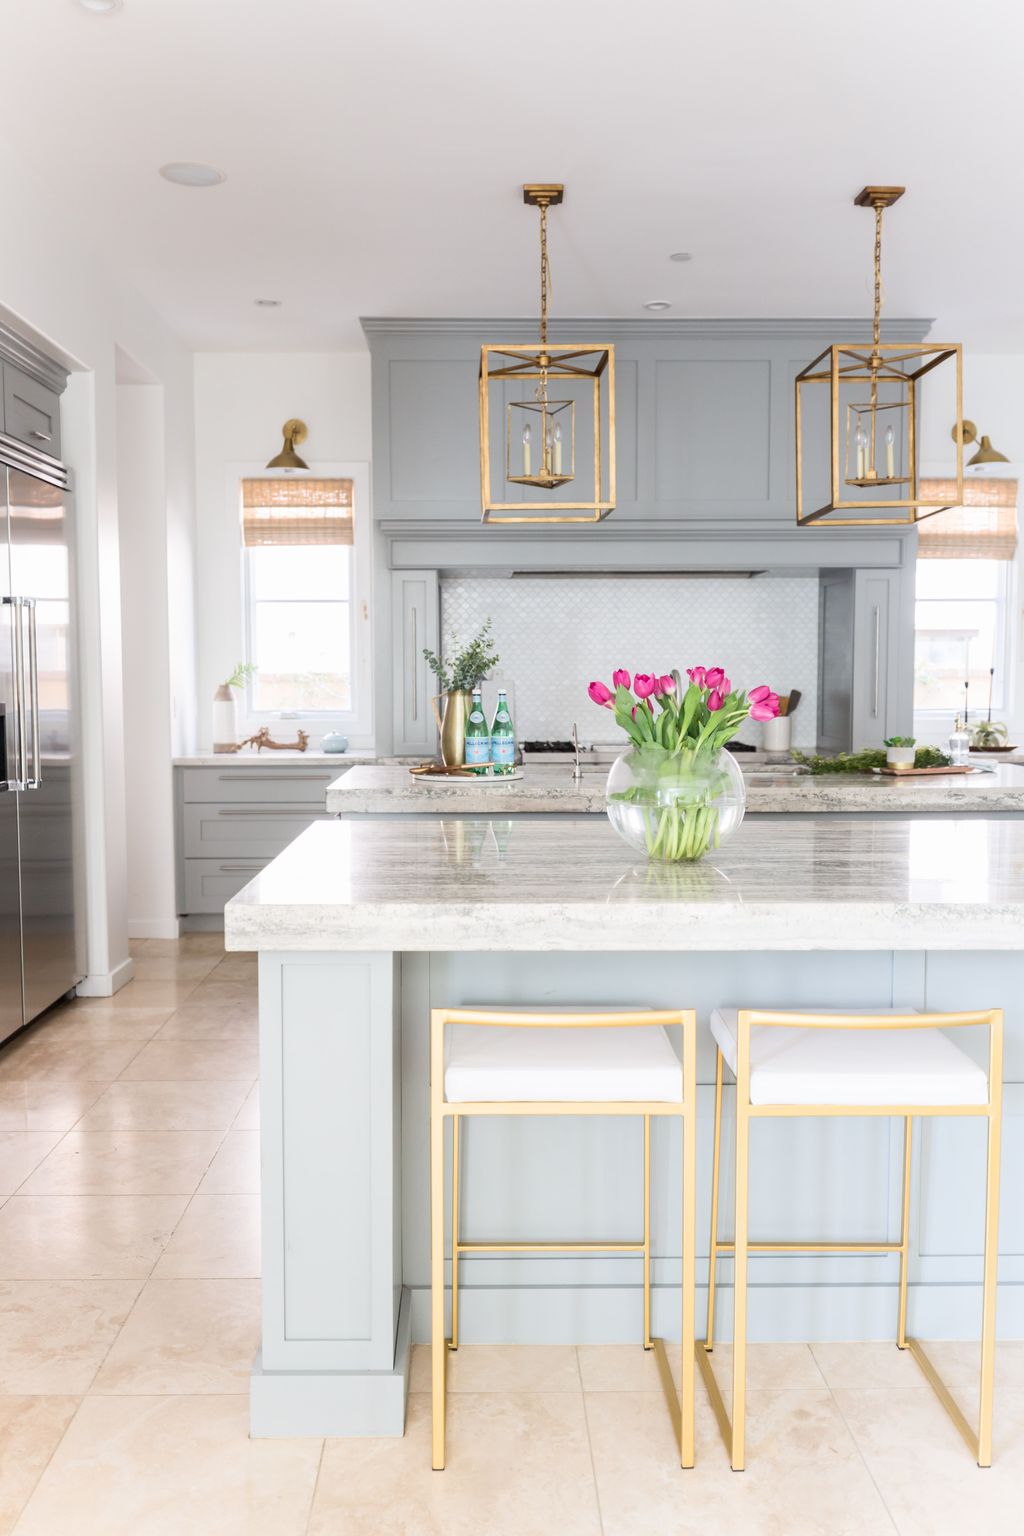 Double island kitchens: 10 ideas for double kitchen islands